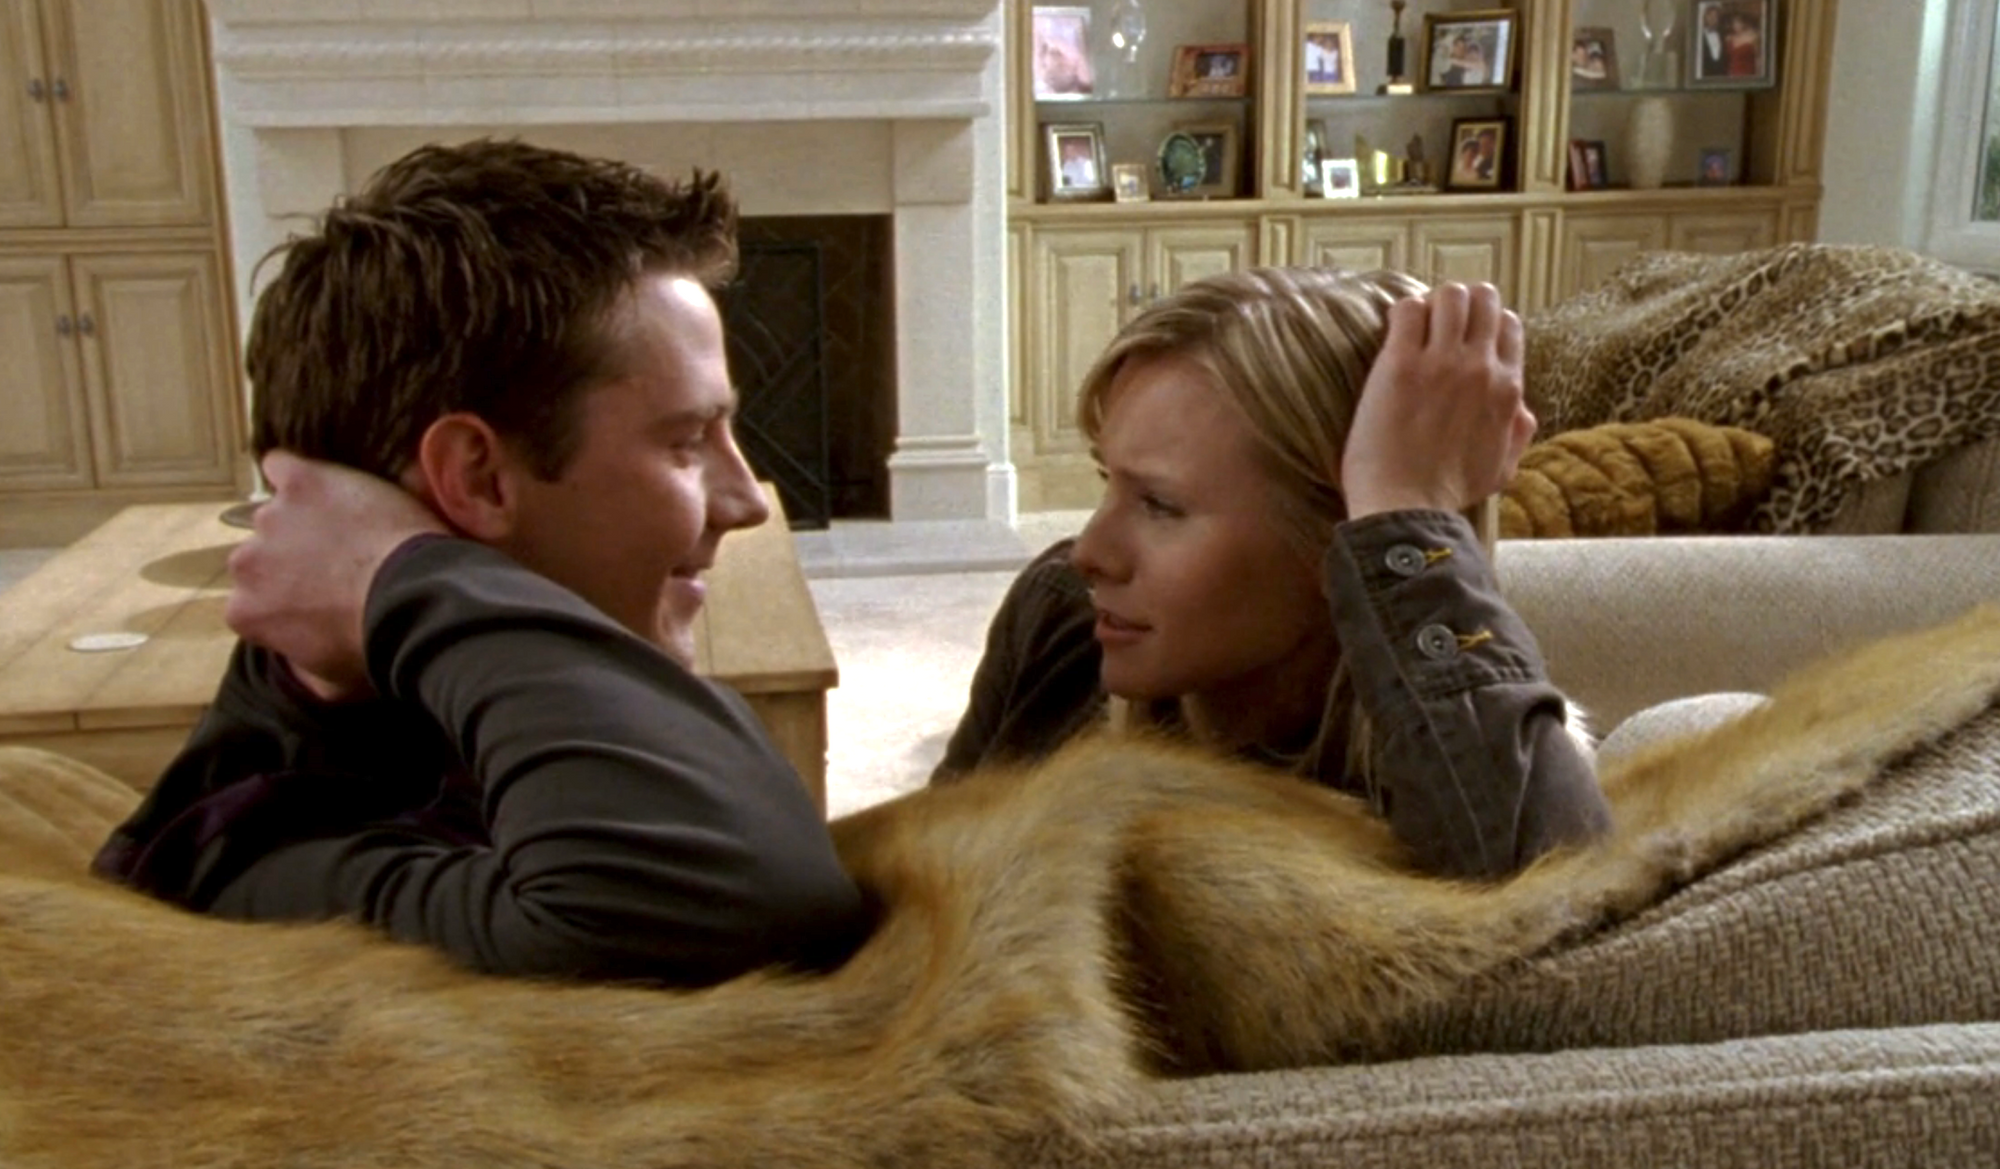 Screenshot from S1E20 of Veronica Mars. Logan and Veronic are sitting on the couch looking at each other. Logan has his right elbow on the couch and Veronica has her left elbow on the couch. They're each leaning on their hands.